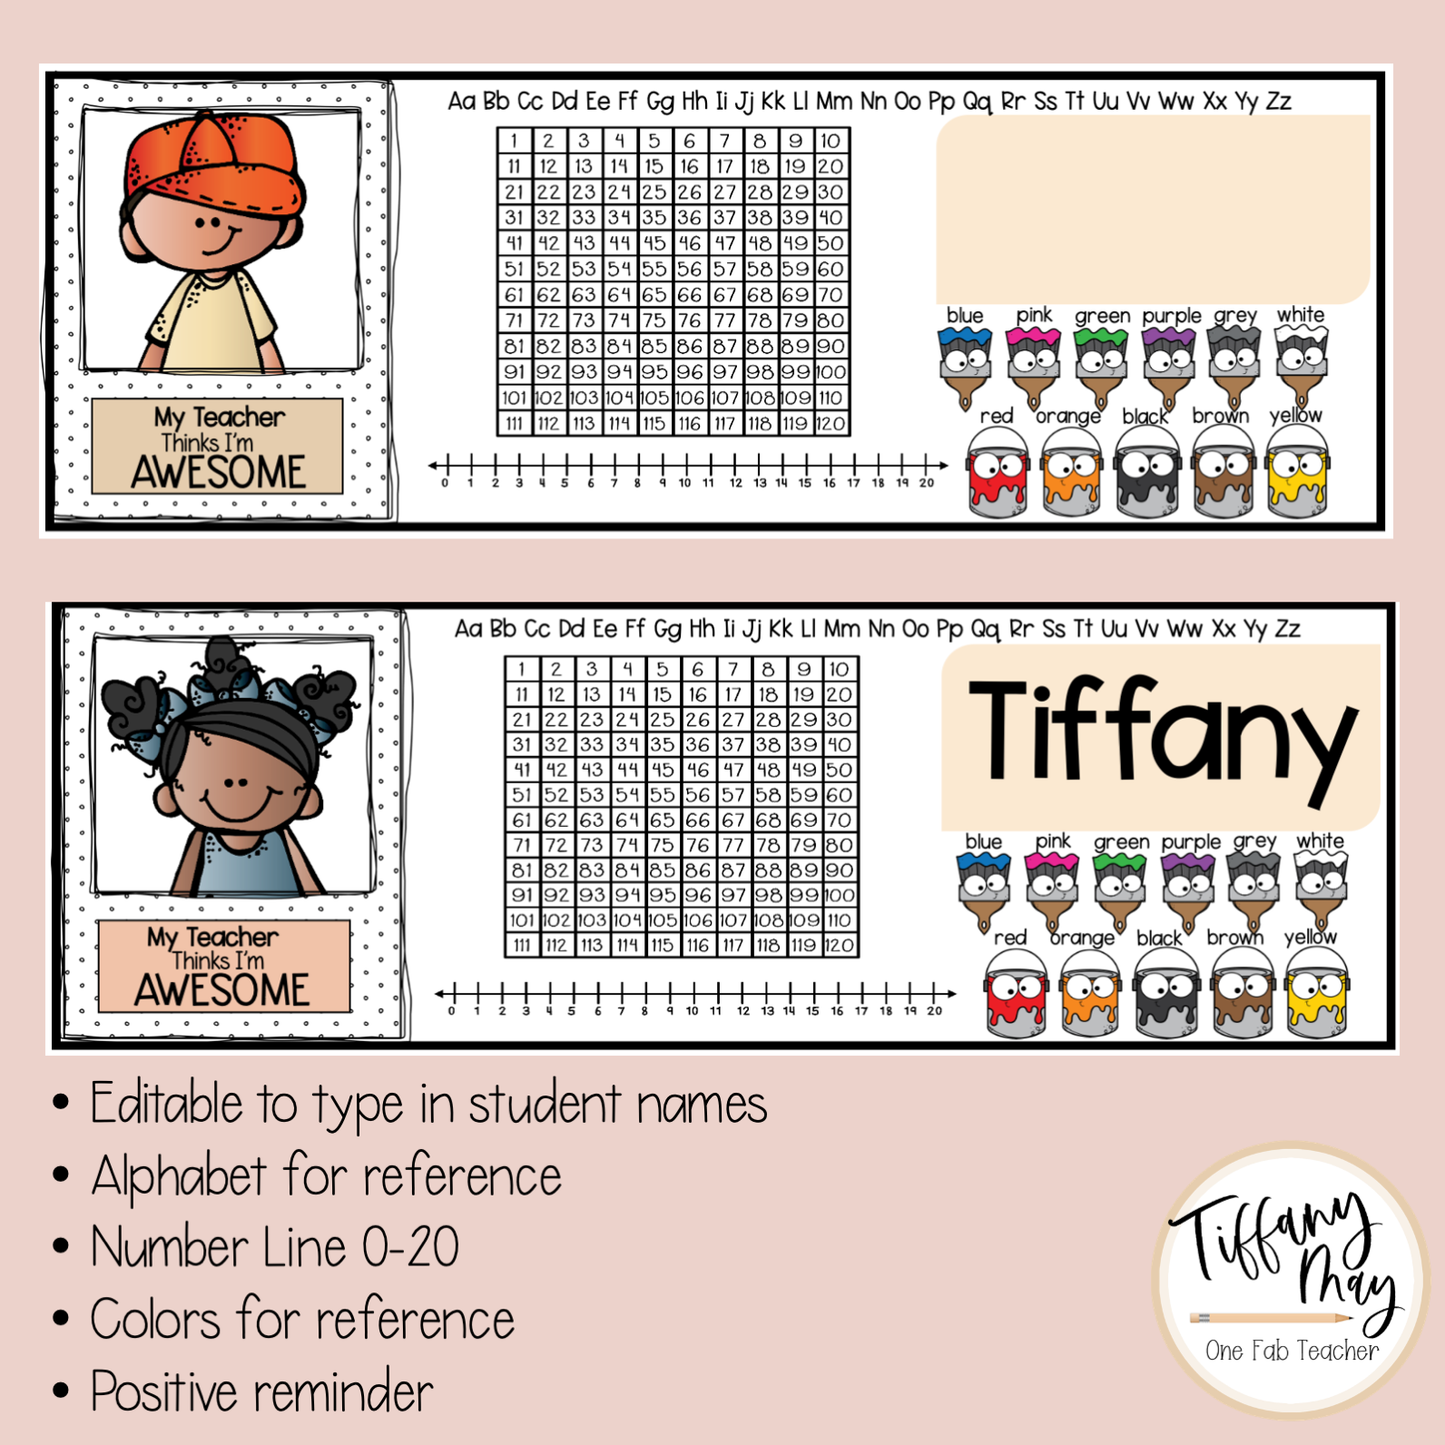 Customizable Boho Desk Name Tags for Engaged Students